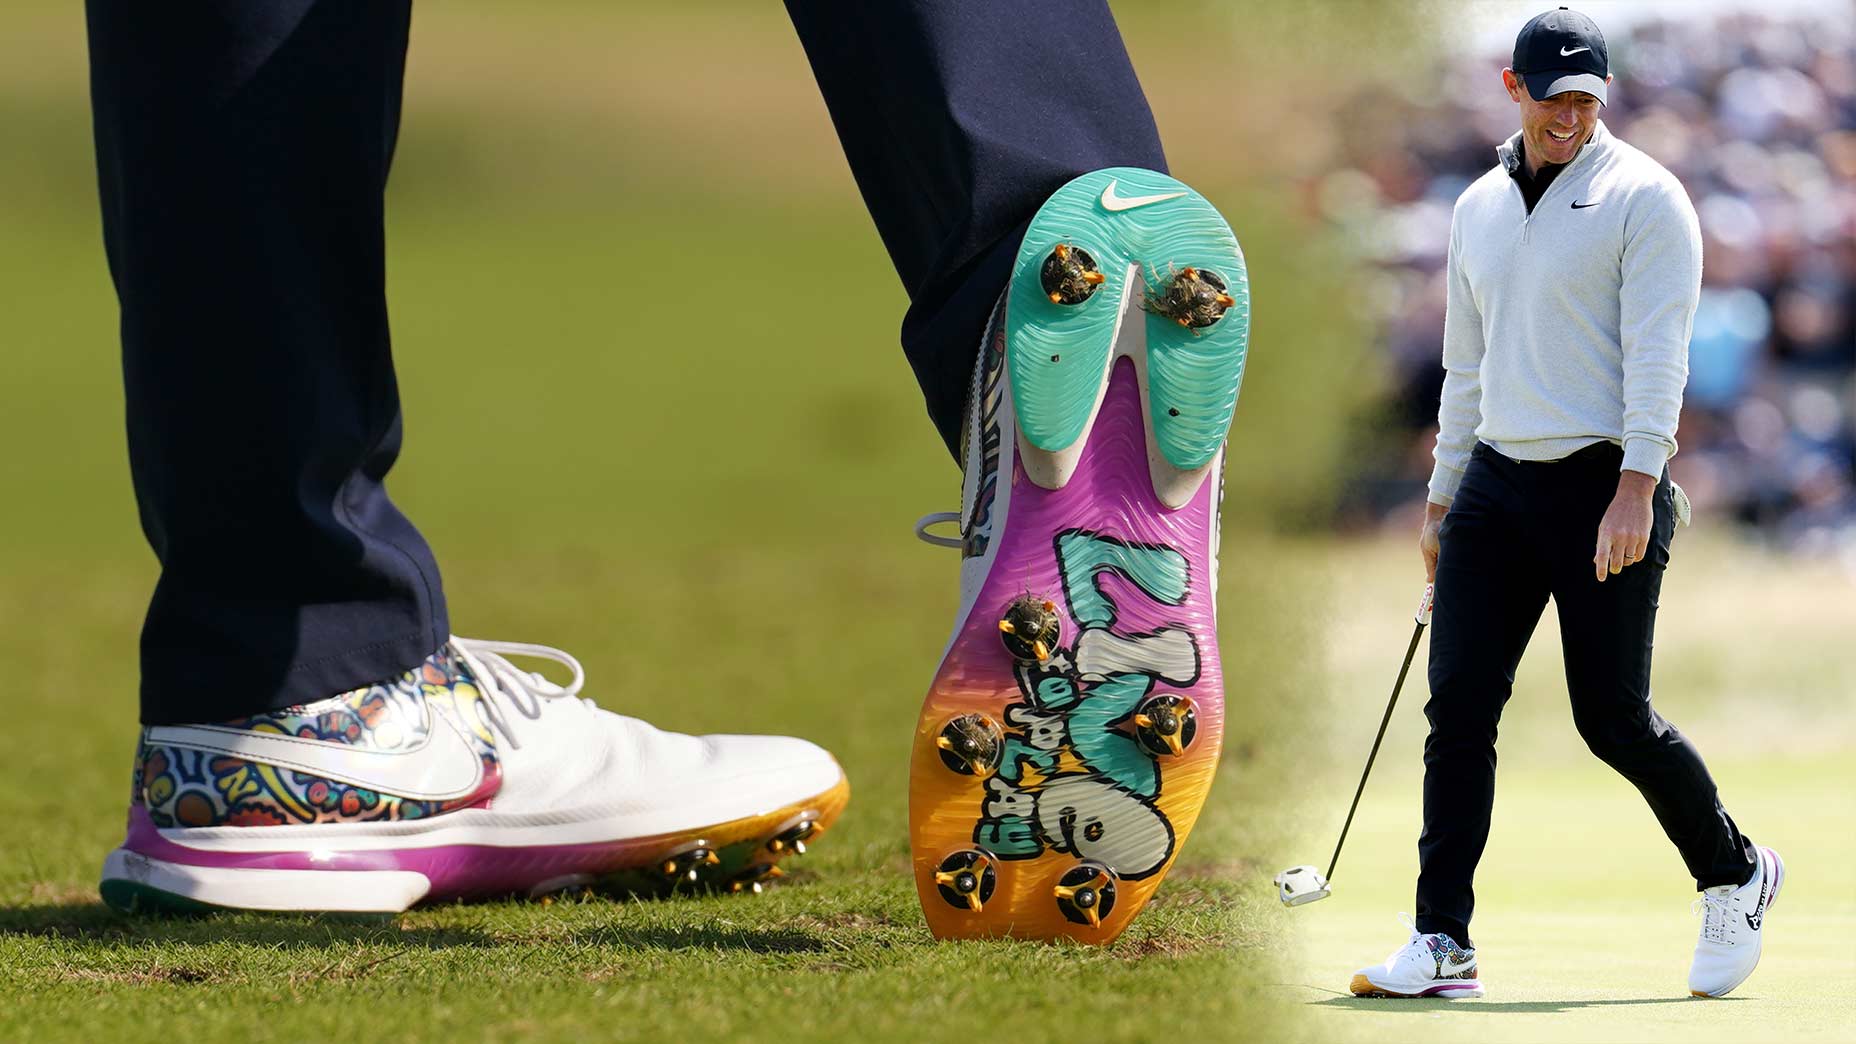 Get these popular Nike golf shoes at The Open before your size ...